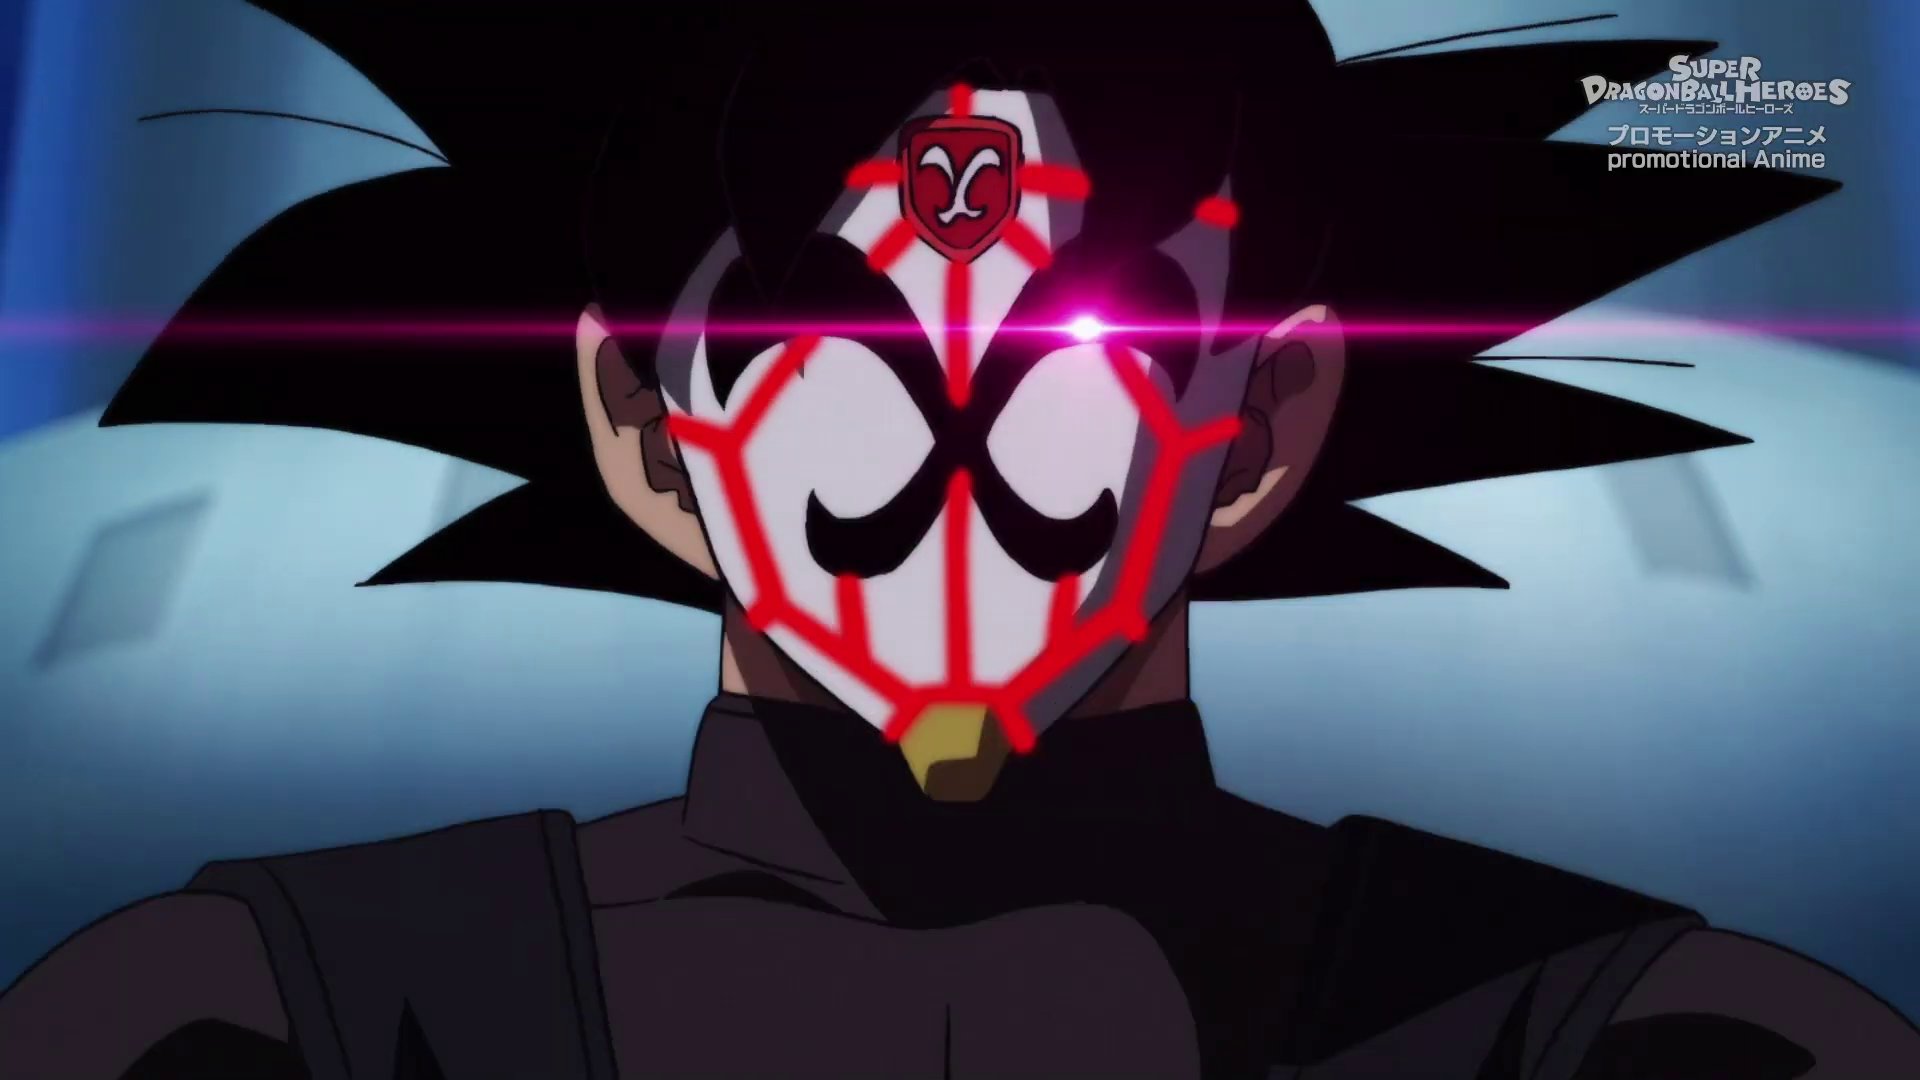 An Otaku ღ favourite shots of ( Masked ) Goku Black from today's episode of Super Dragon Ball Heroes ❤❤